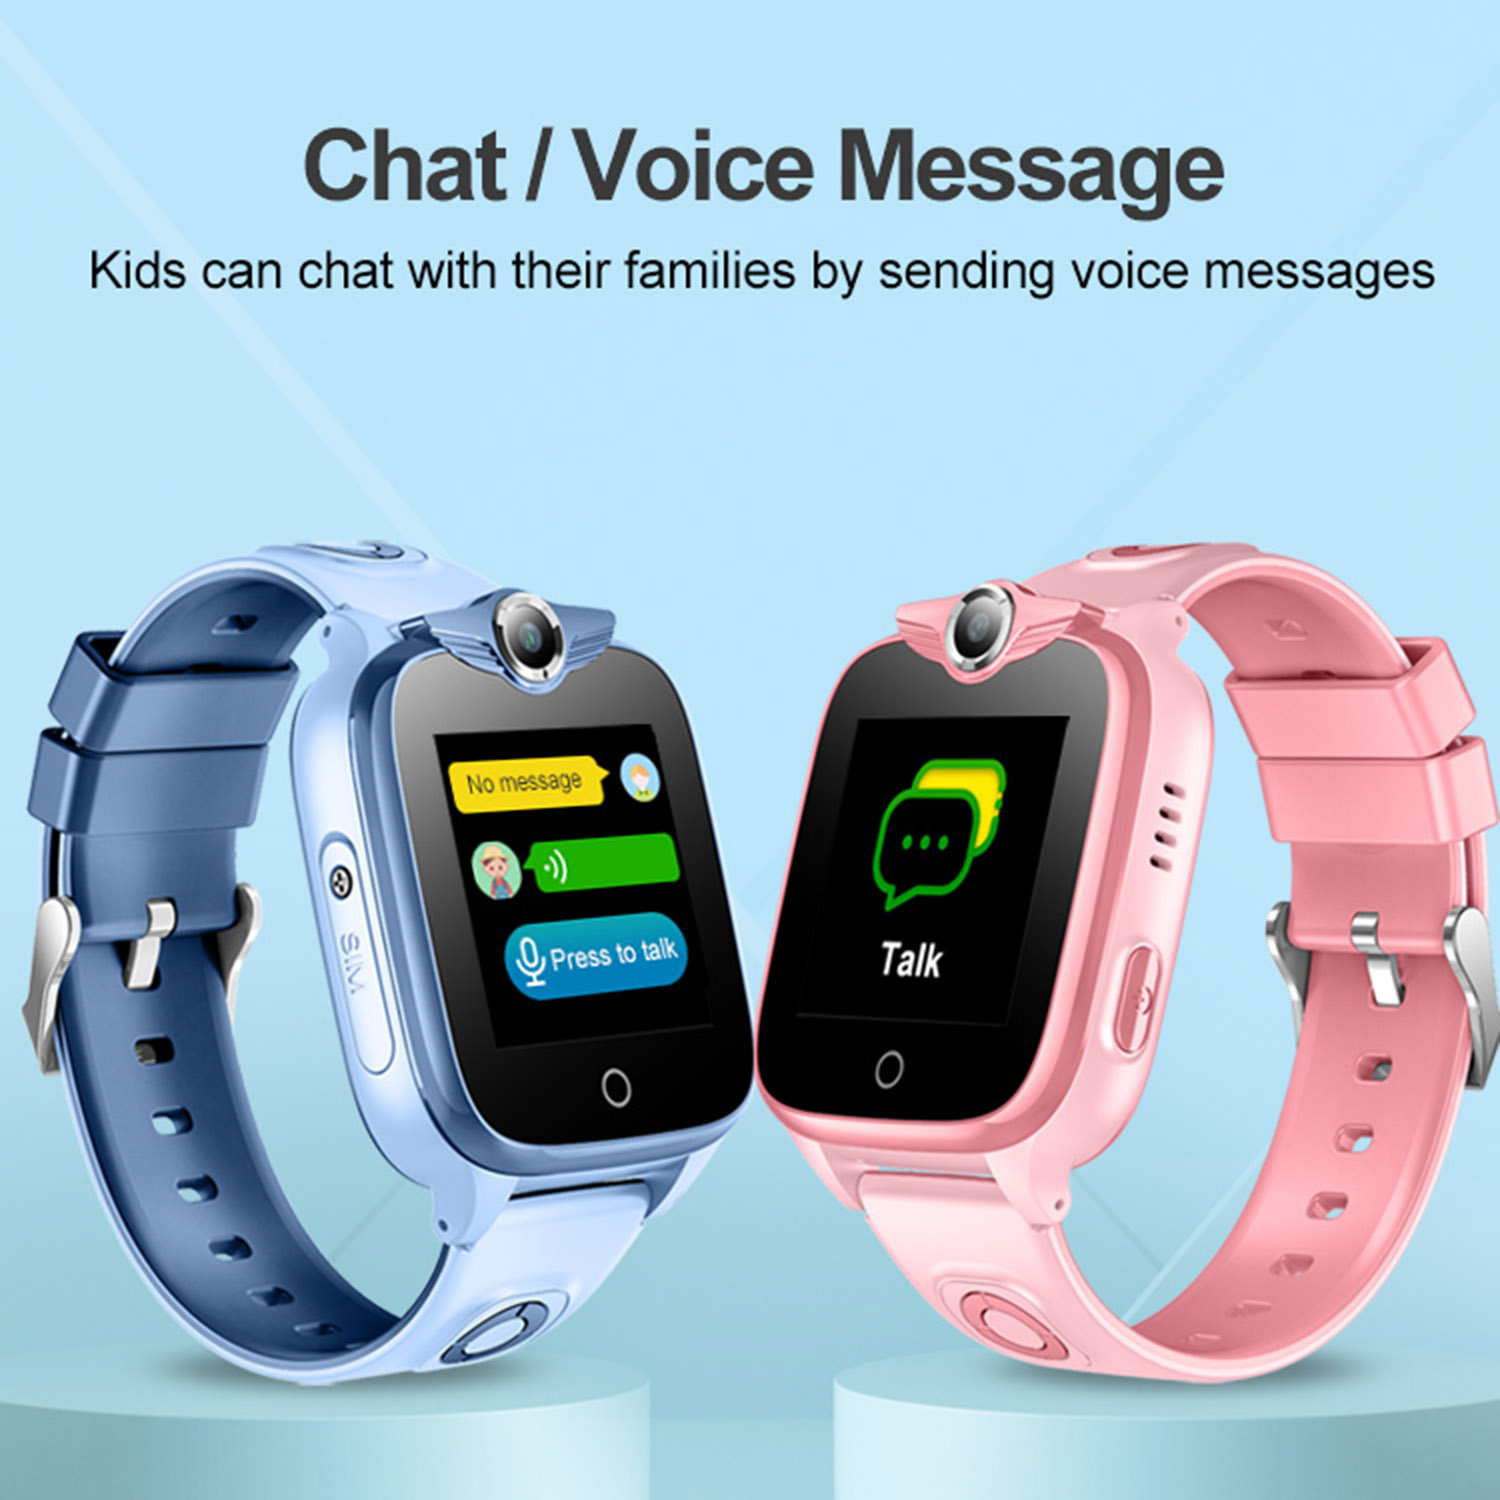 2G new developed IP67 Waterproof Touch Screen parental Control Boys Girls GPS Smart Watch Tracker with Voice Chat Y9